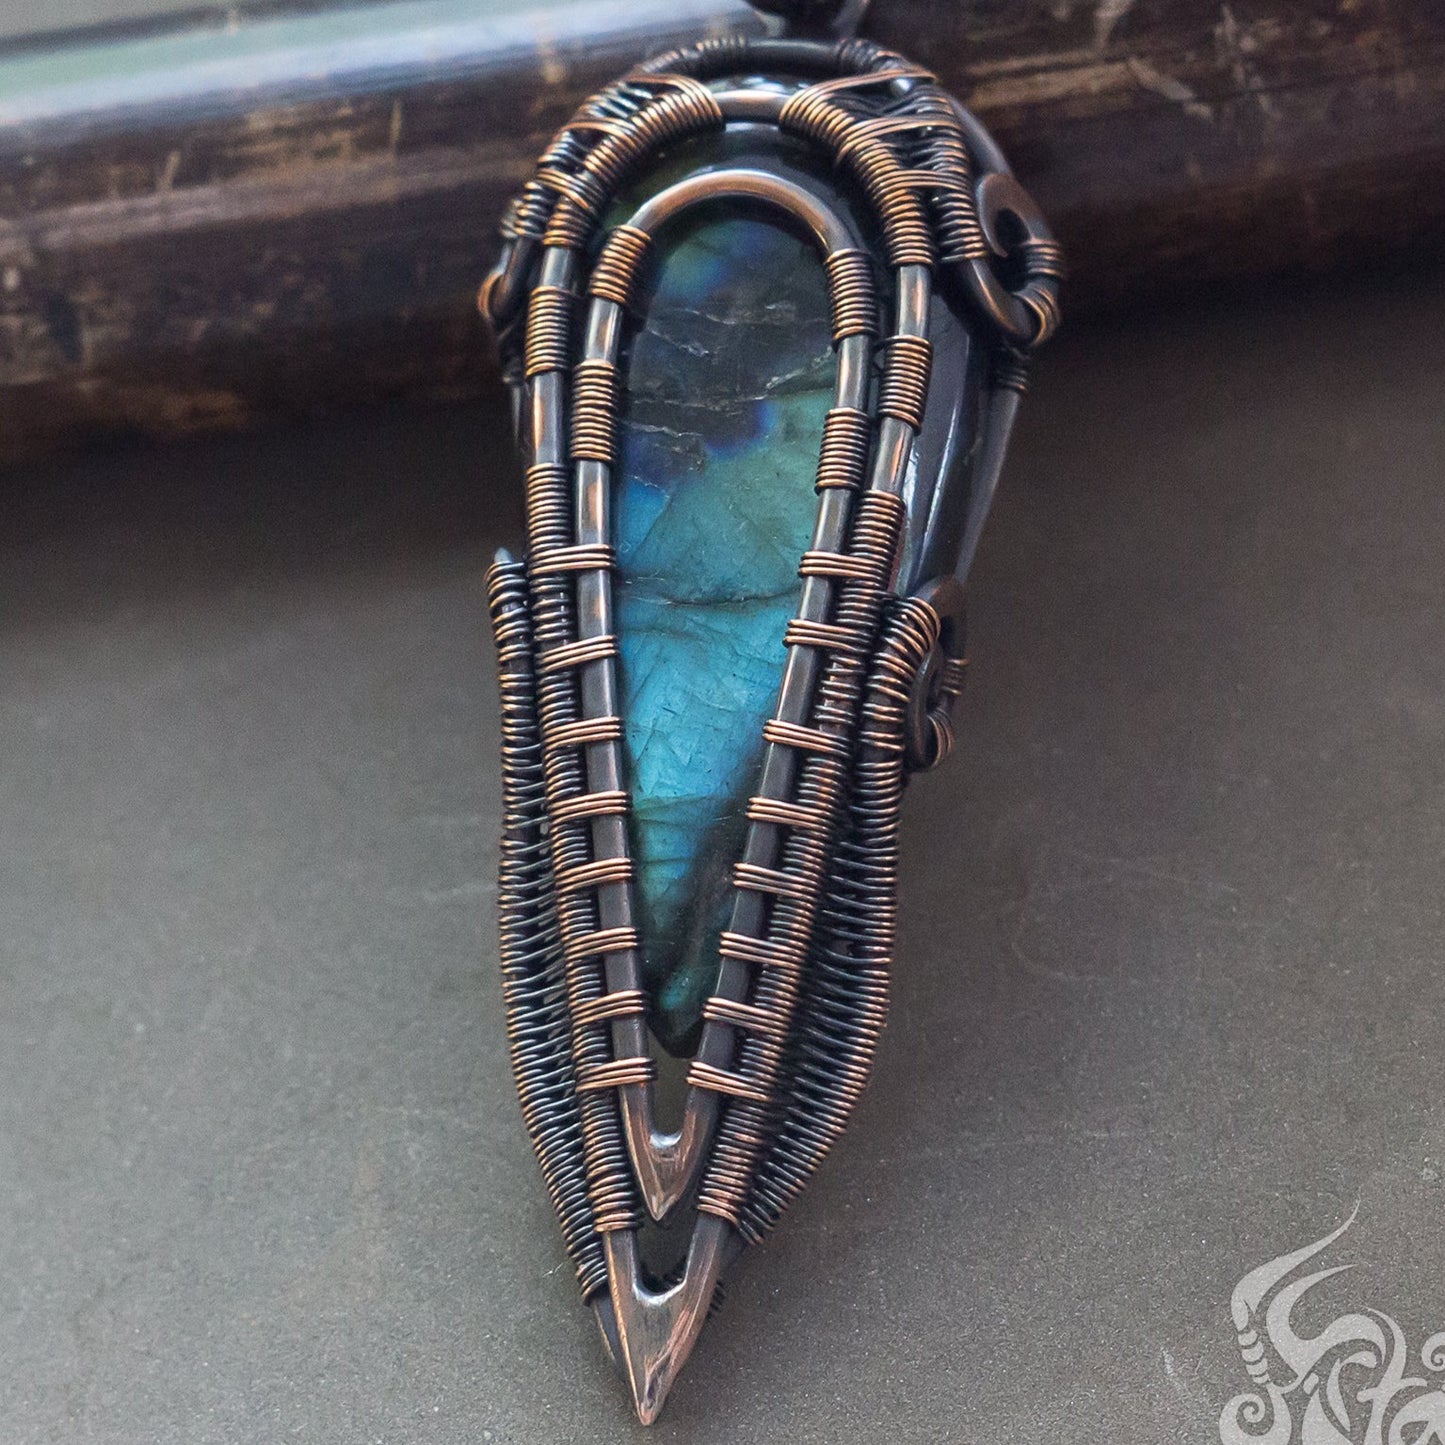 Wire wrapped pendant. Copper wire wrap stone pendant Geek rpg jewelry piece Neck mans hanger deep blue natural labradorite stone unique handcrafted necklace Pagan spiritual healing pendant on neck